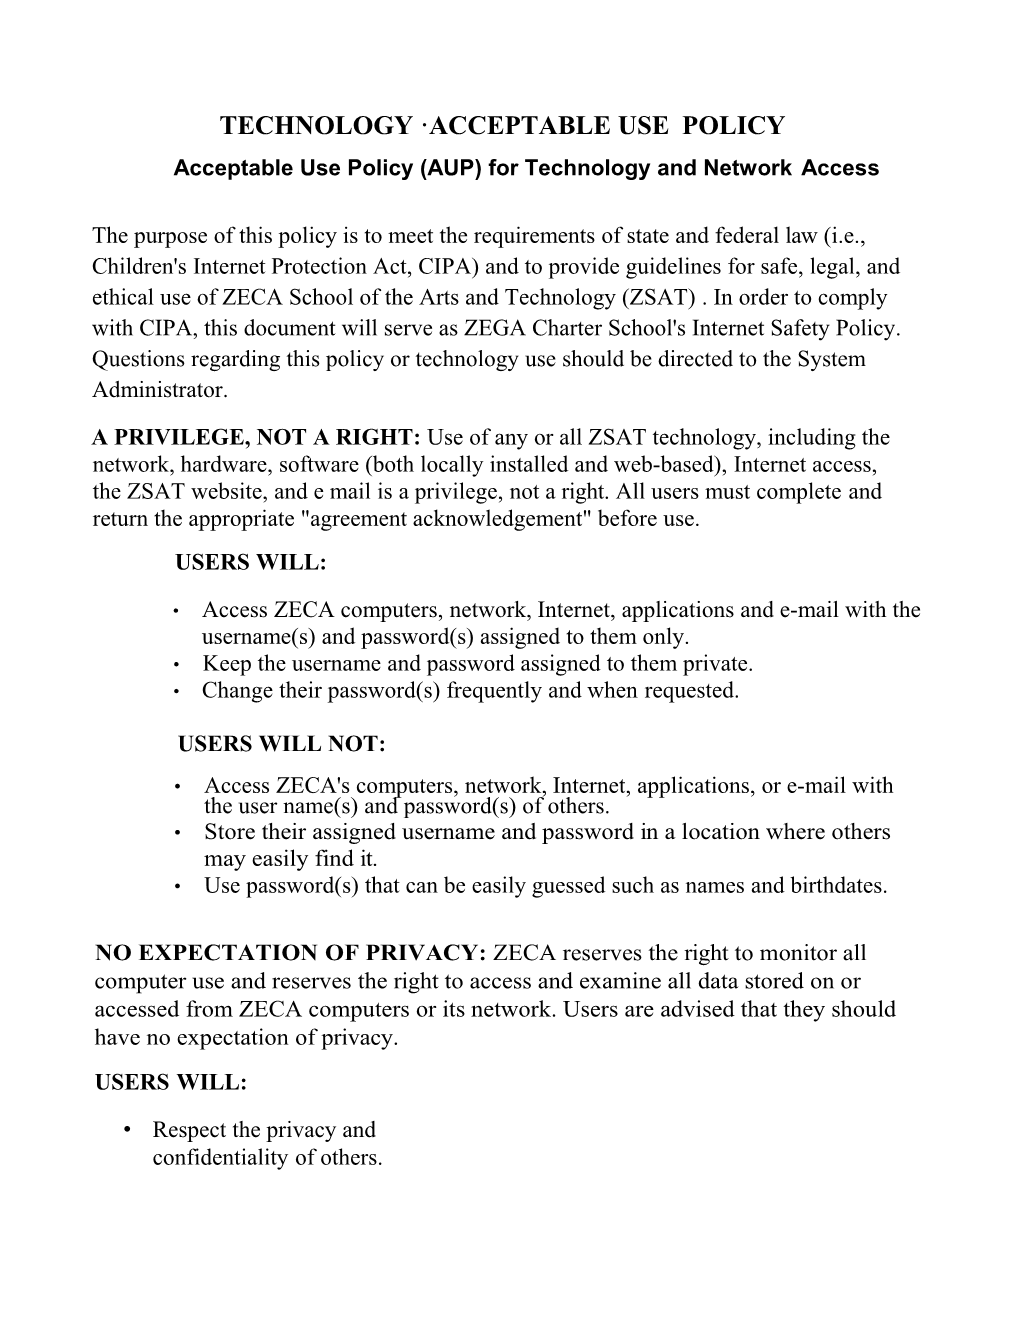 Acceptable Use Policy (AUP) for Technology and Networkaccess